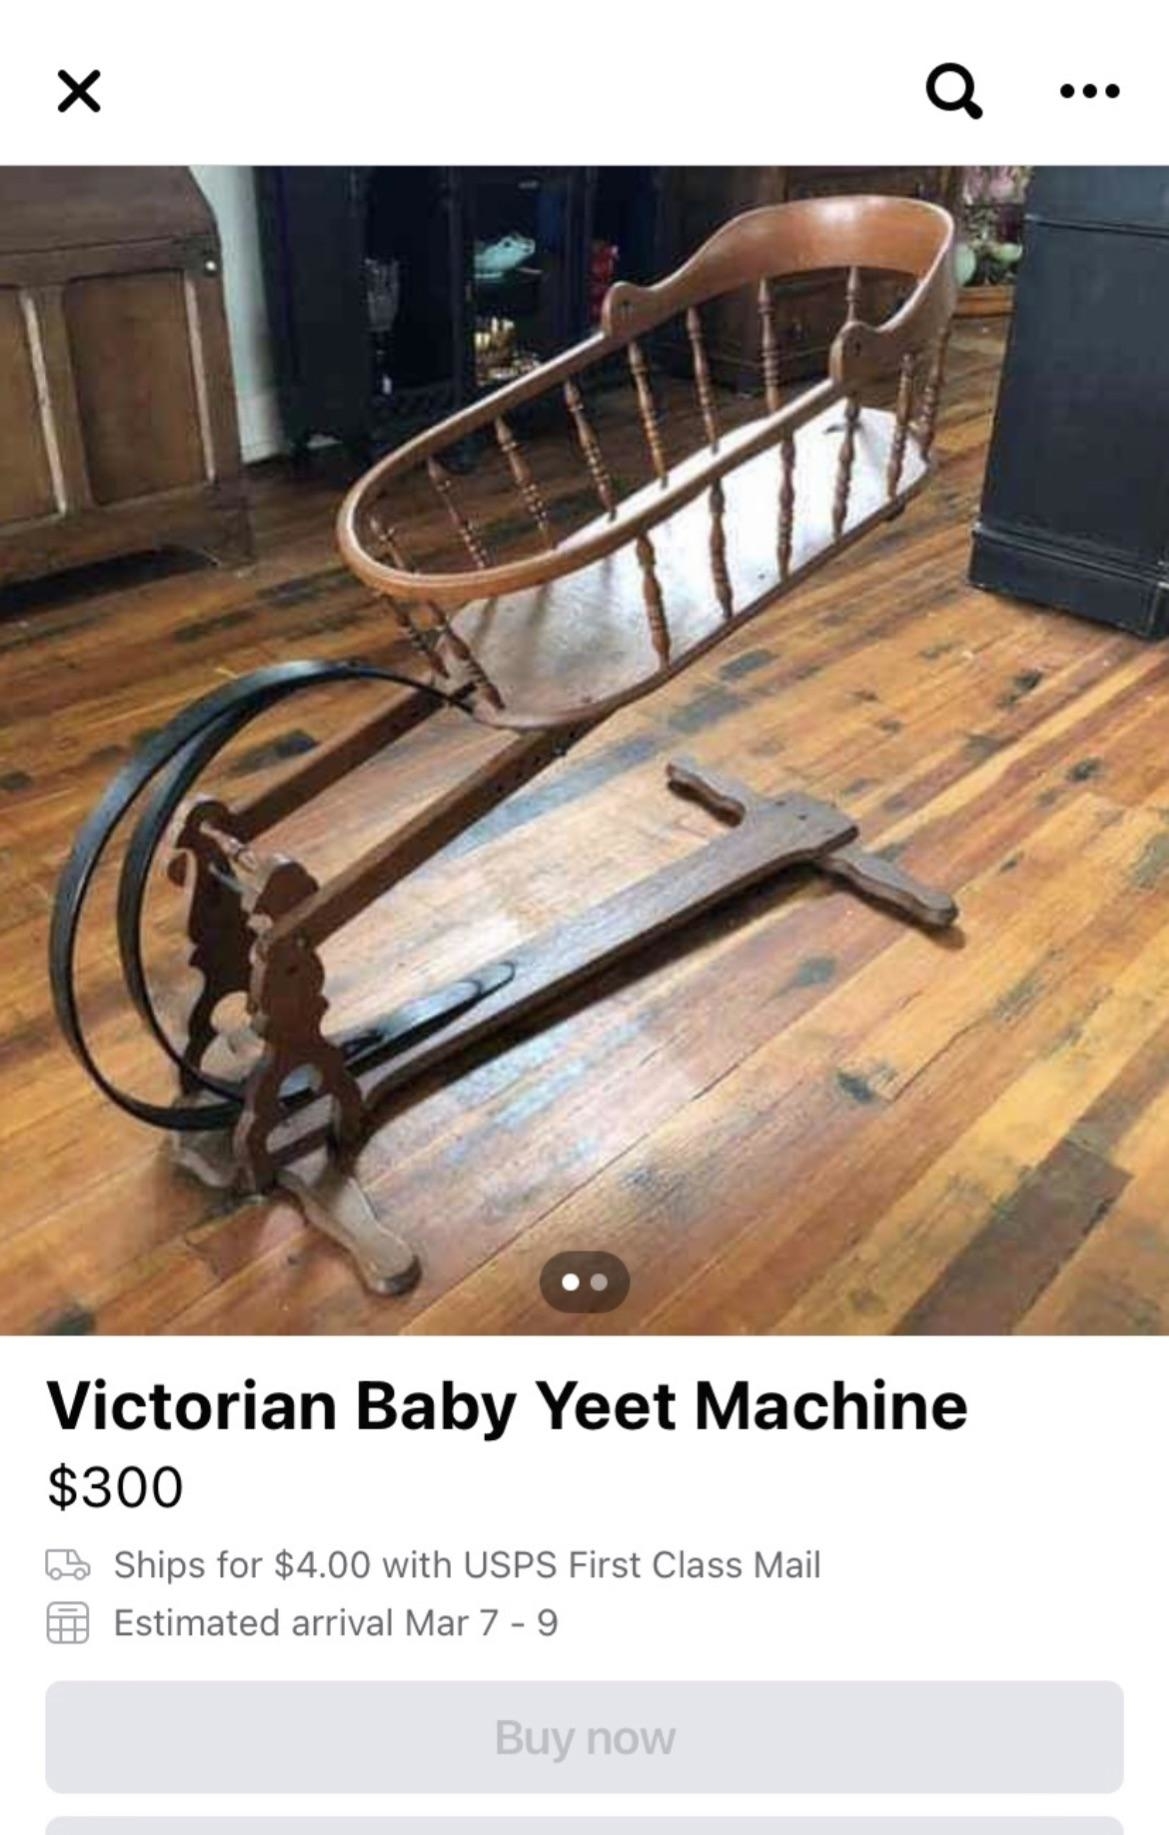 Antique rocking baby cradle for sale, labeled as &quot;Victorian Baby Yeet Machine,&quot; price listed at $300